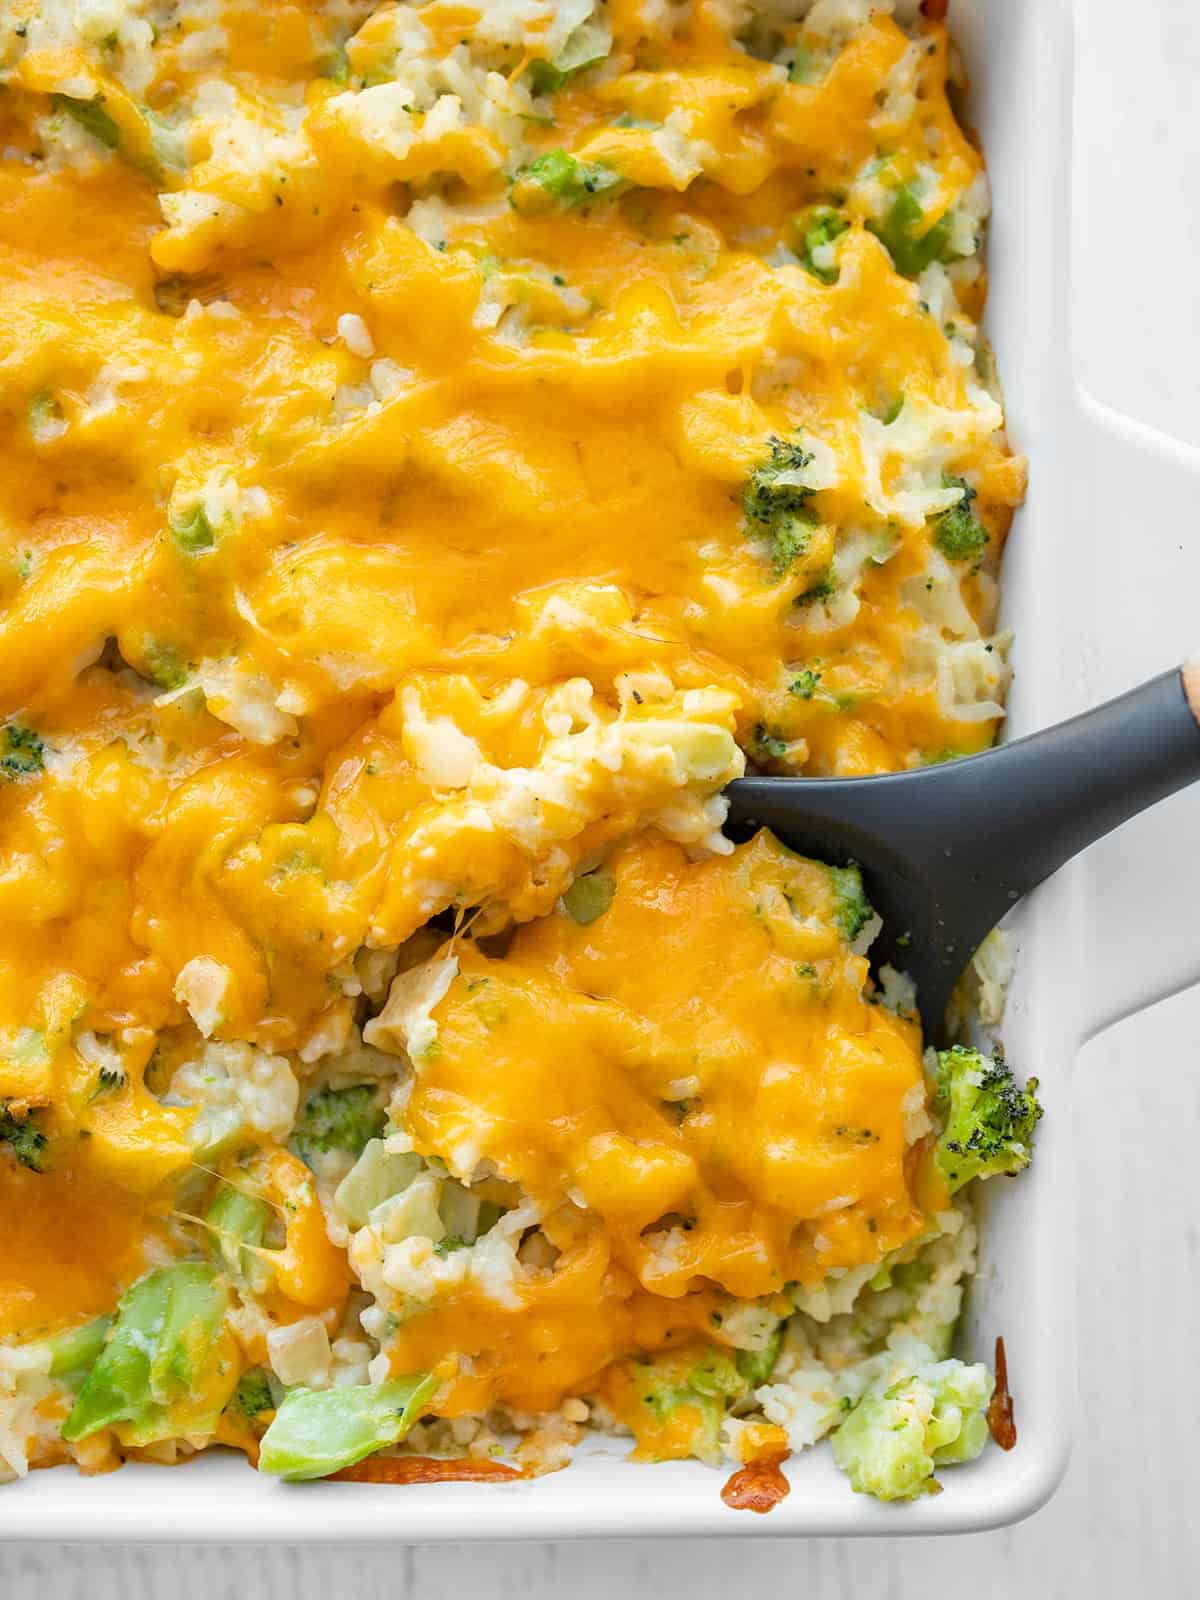 Overhead view of a large spoon scooping some broccoli cheese casserole from the dish